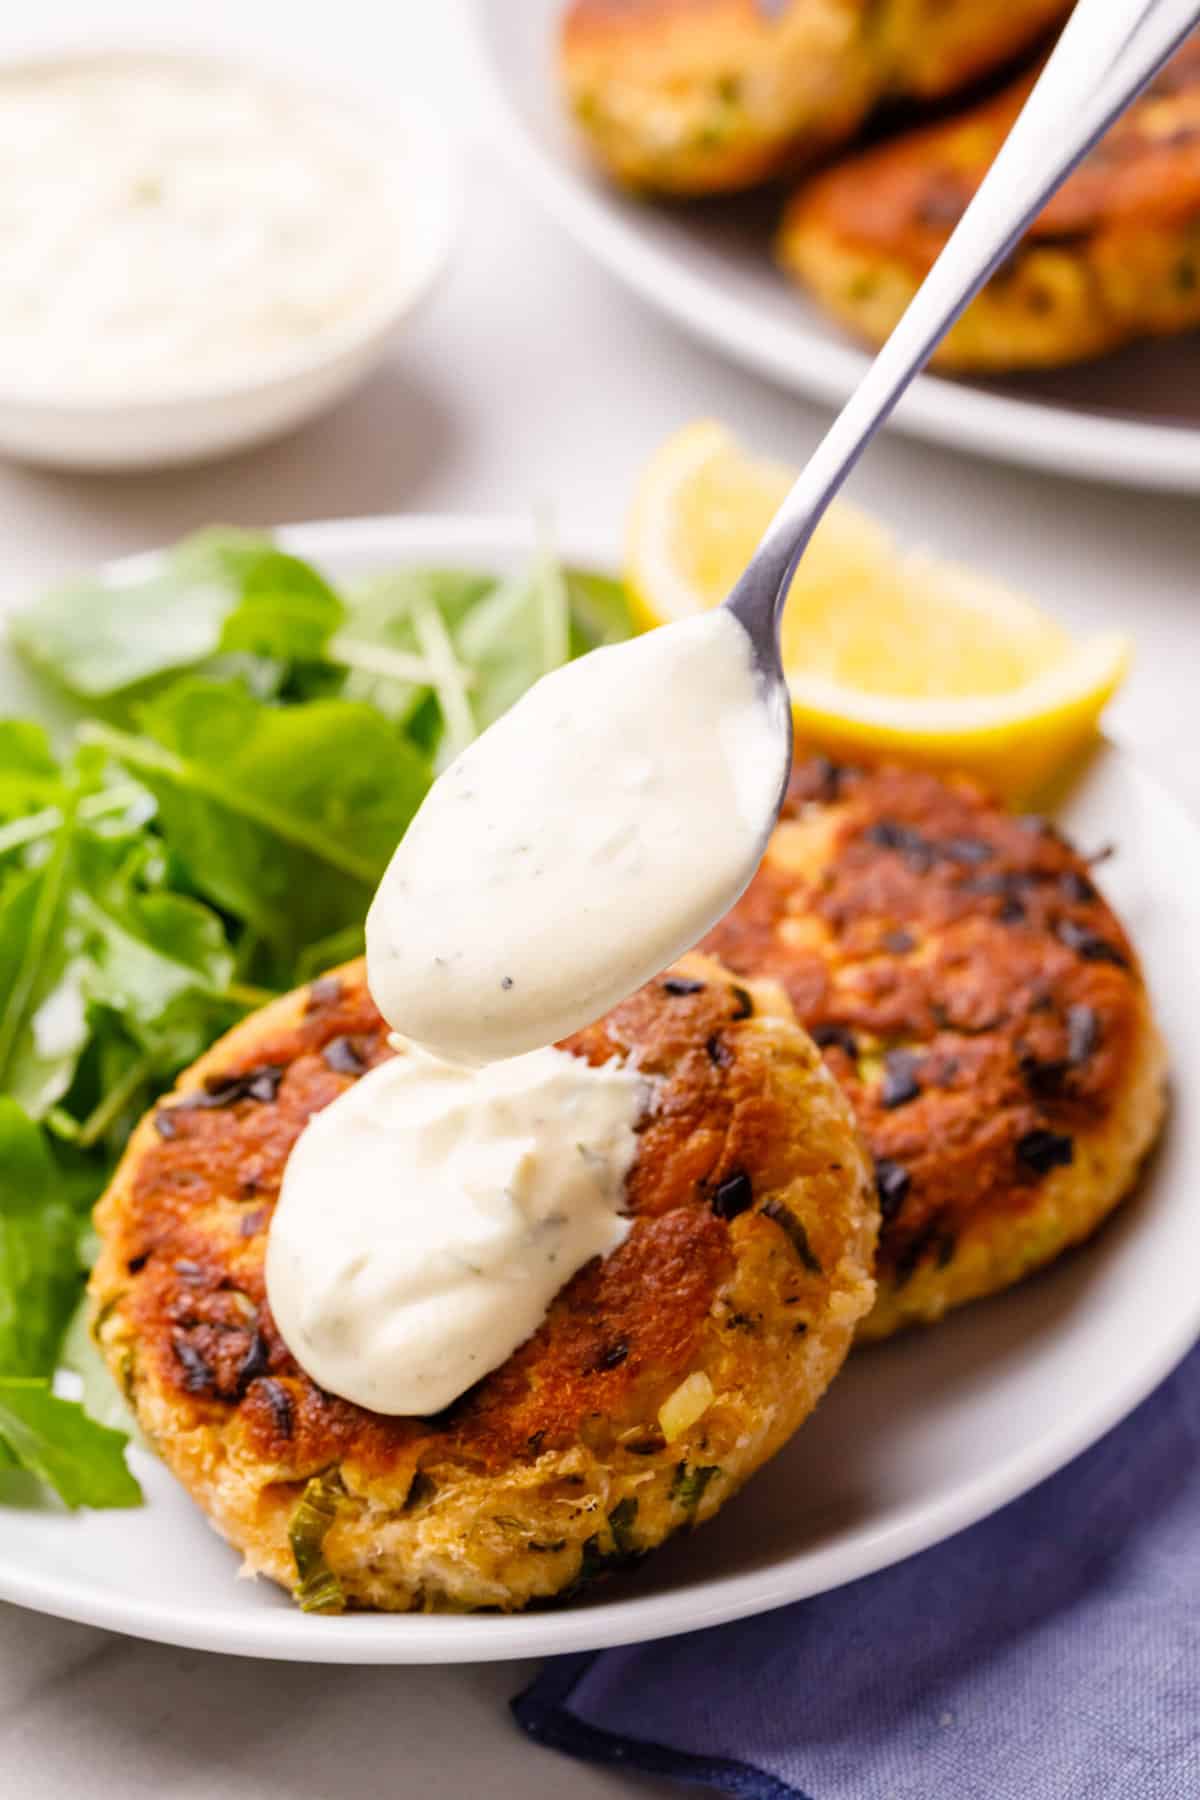 two salmon patties topped with dill sauce and a side of greens served on a white plate